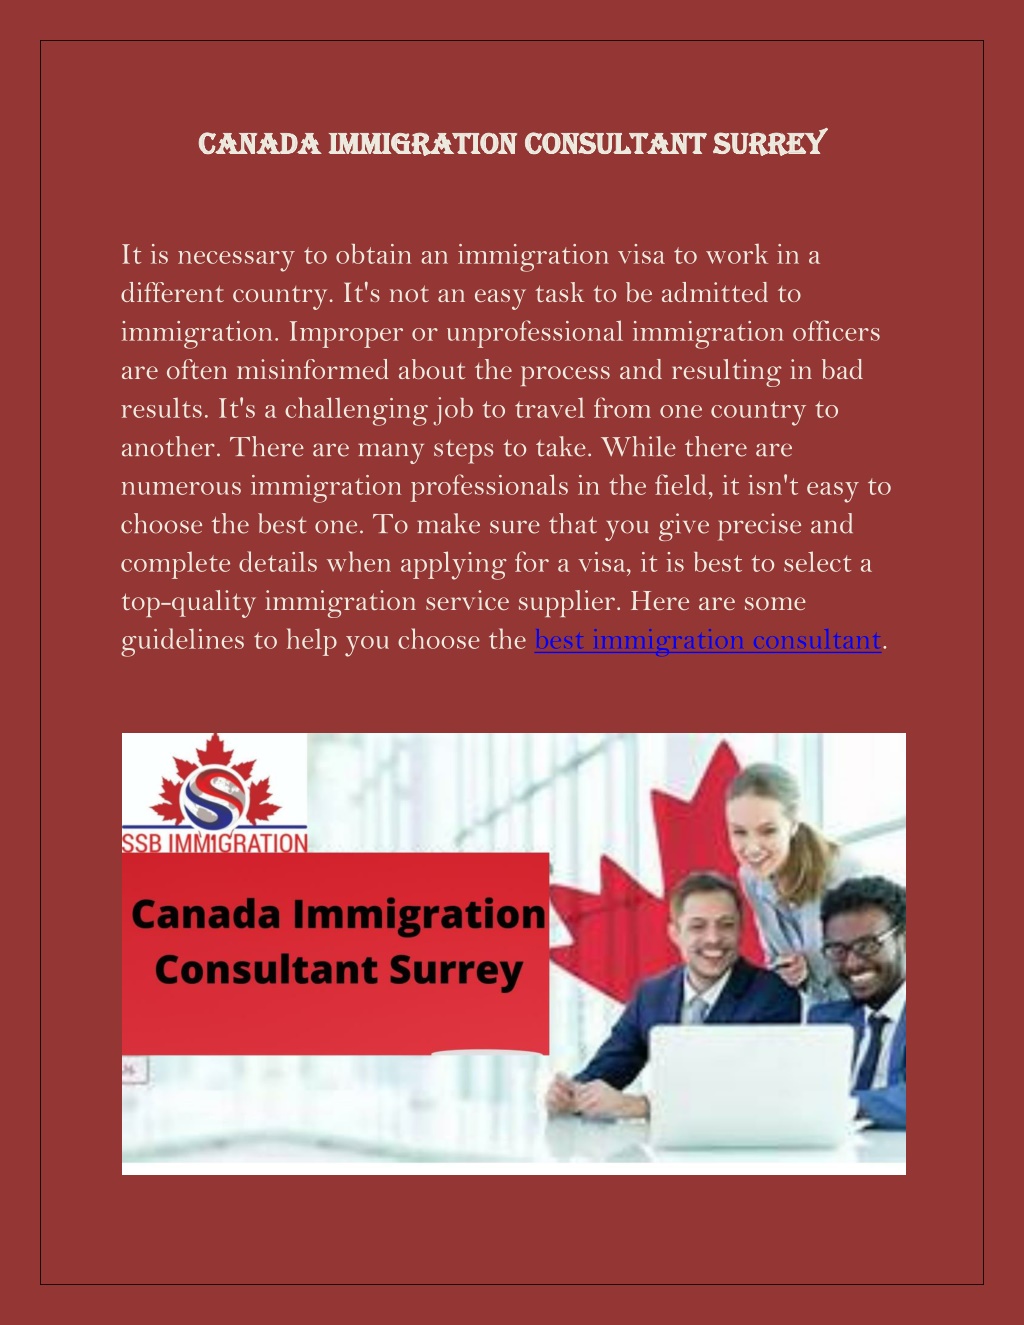 Ppt Canada Immigration Consultant Surrey Powerpoint Presentation Free Download Id11294892 9755